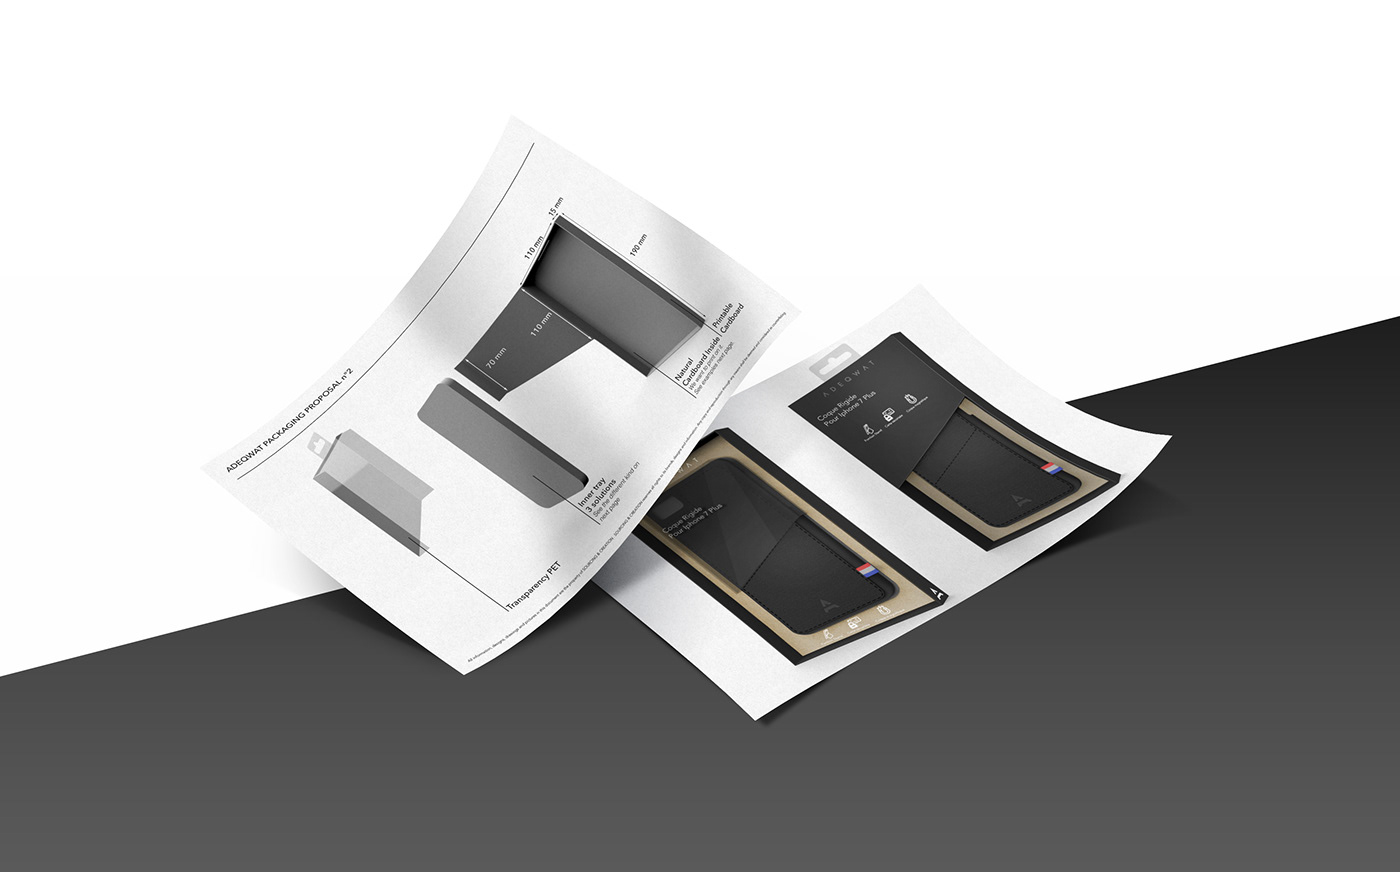 phone case Adeqwat Stand card storage Packaging codesign maker product design  industrial design 